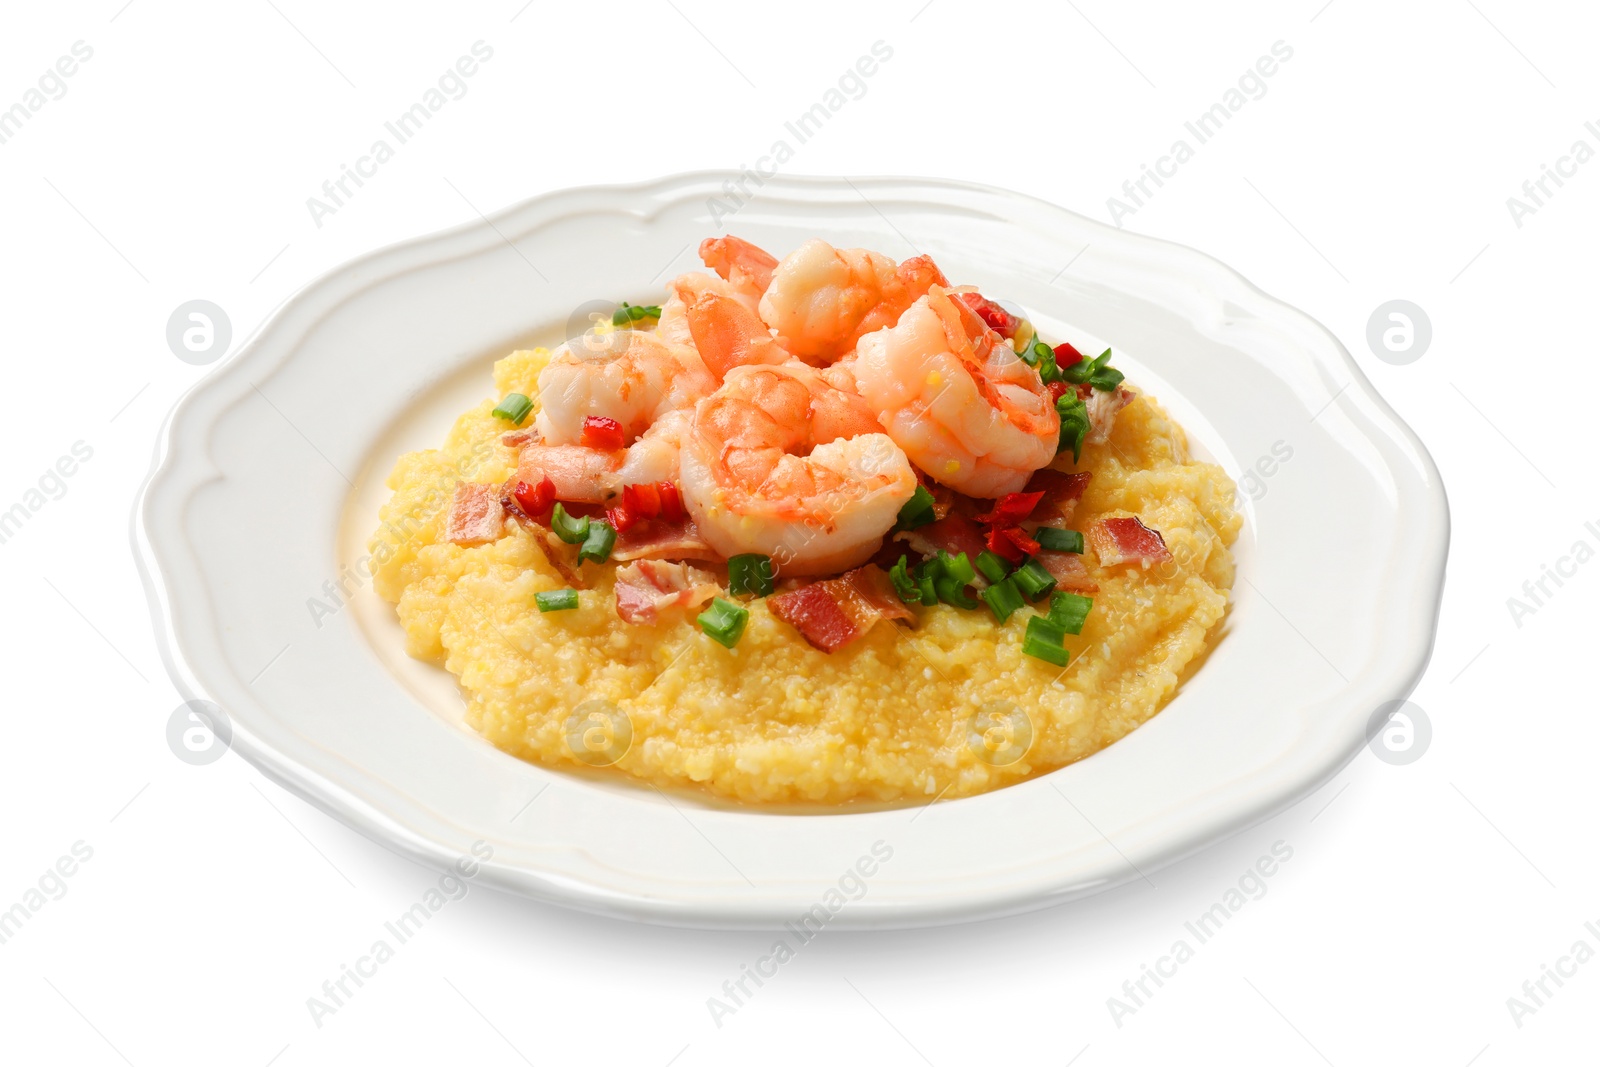 Photo of Plate with fresh tasty shrimps, bacon, grits, green onion and pepper isolated on white